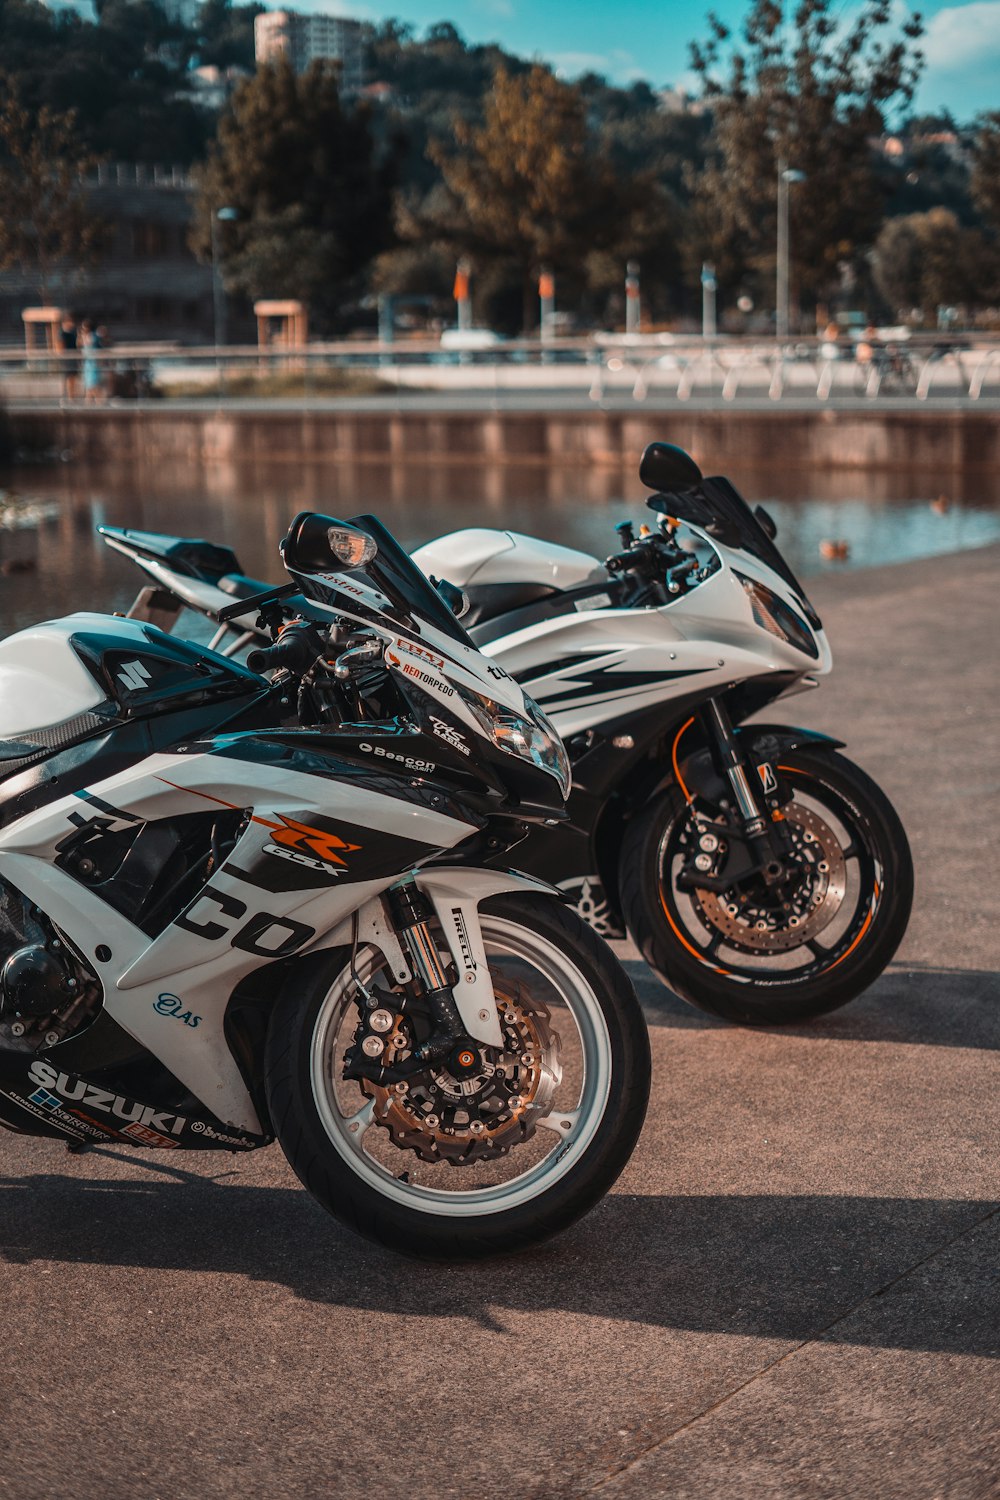 white and black sports bike parked on gray concrete road during daytime